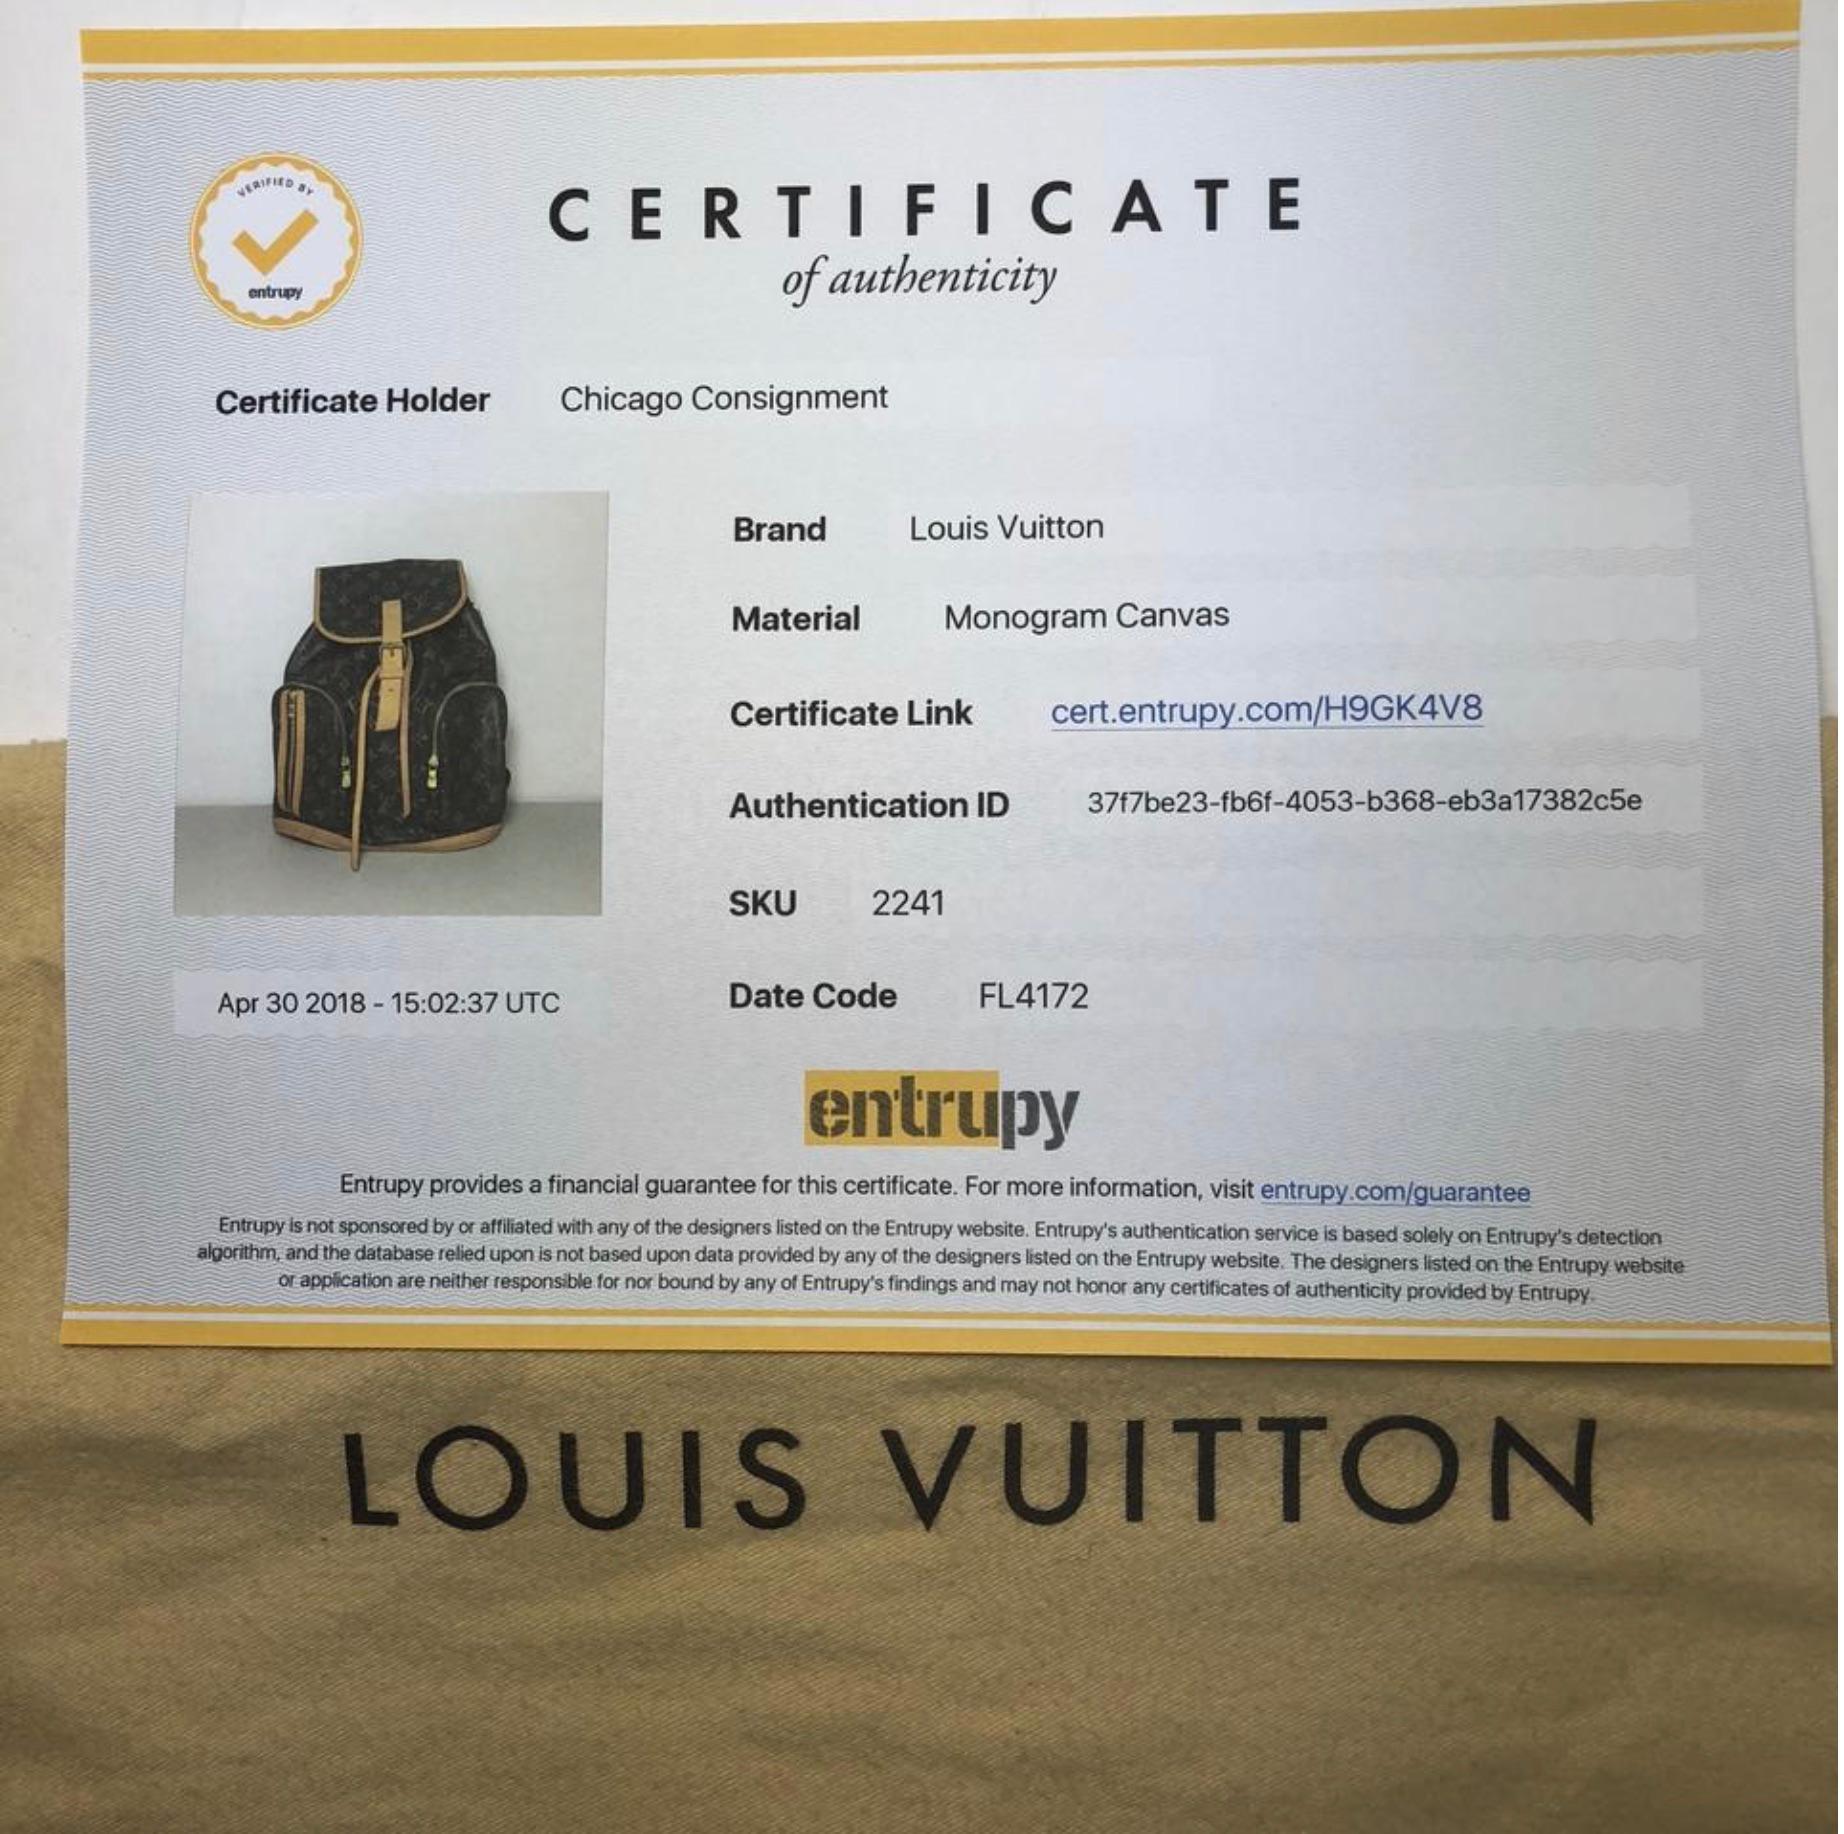 MODEL - Louis Vuitton Monogram Bosphore Backpack

CONDITION - Exceptional! Light vachette with light color transfer, no dryness and no cracking. Bright and shiny hardware with no tarnishing or chipping. No rips, holes, tears, stains or odors. Piece